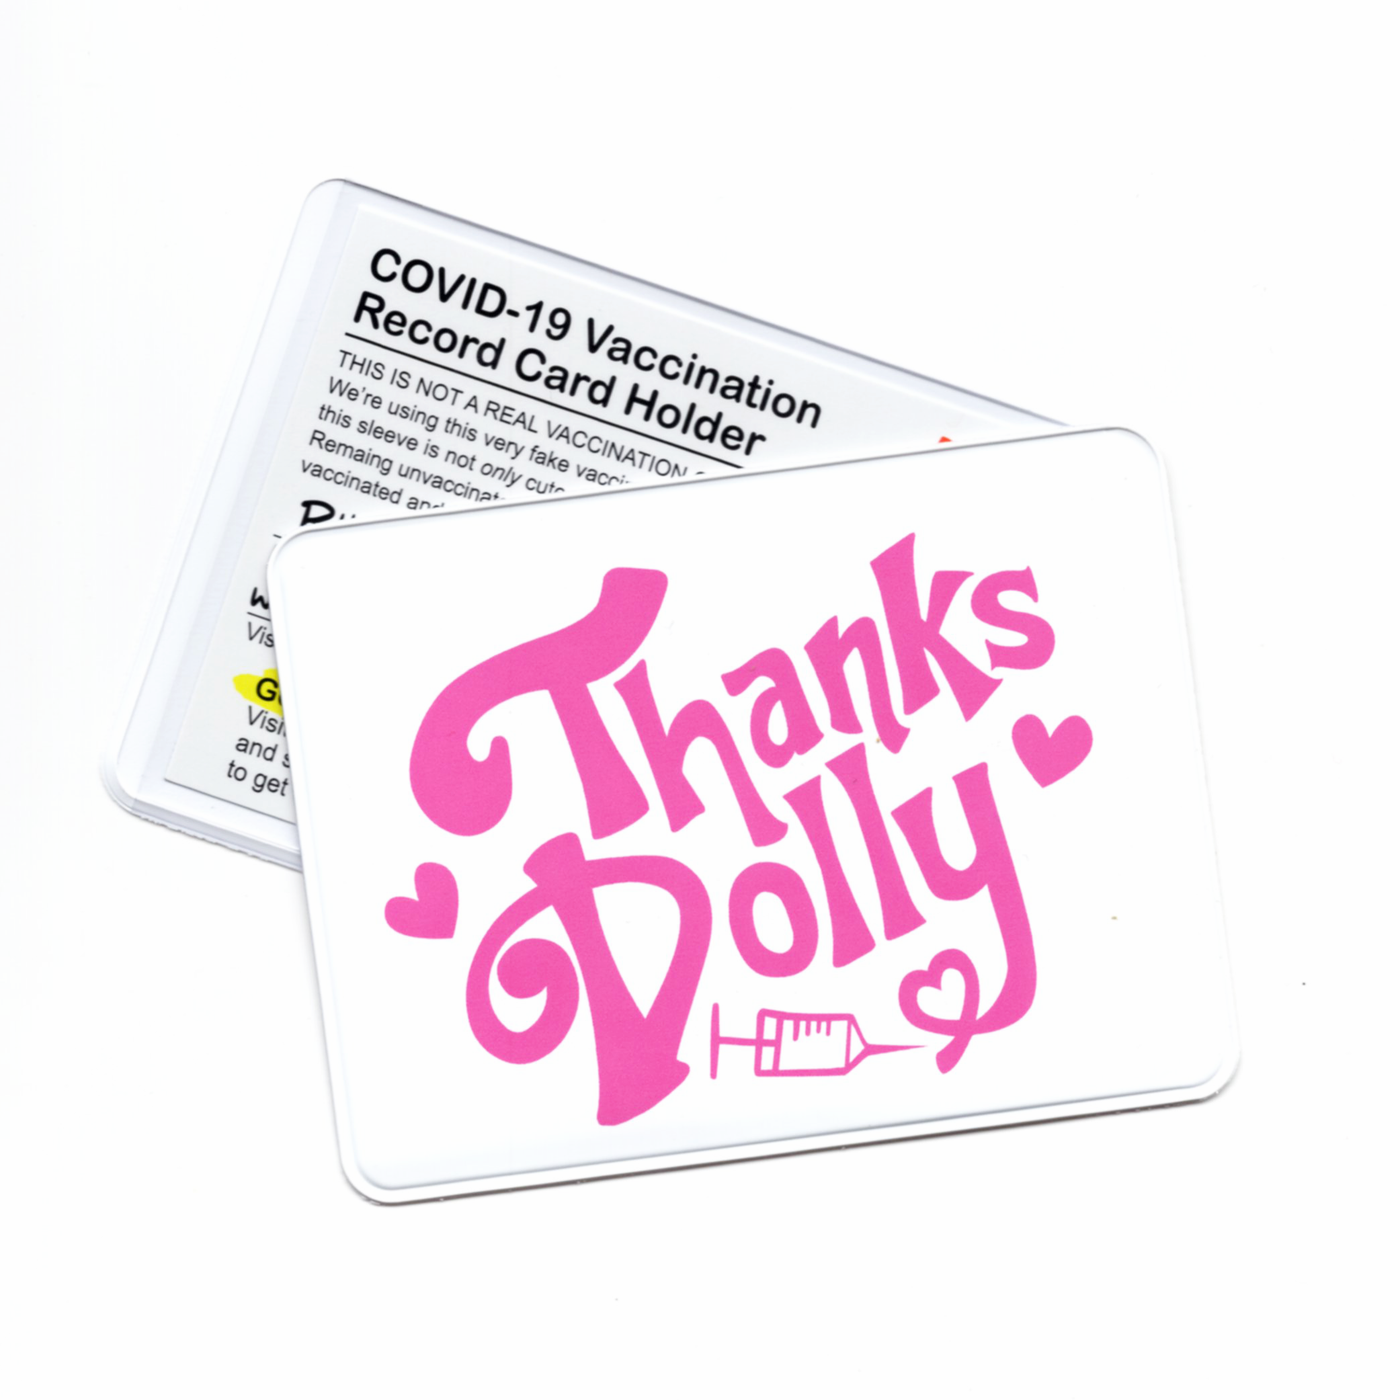 Thanks Dolly! Vaccination Card Case/Holder